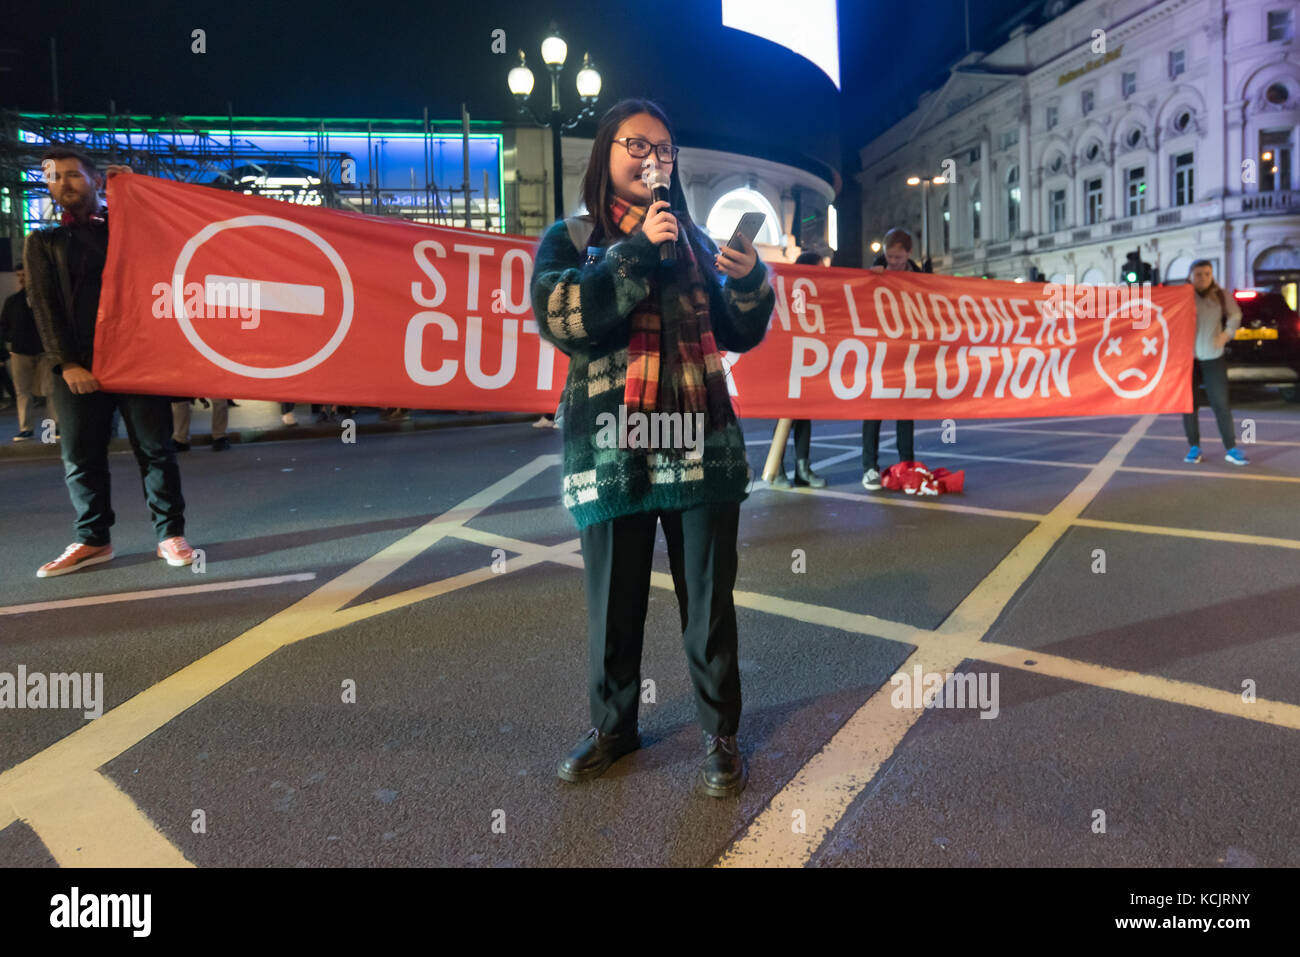 London, UK. 5th October 2017. A campaigner speaks about the thousands of premature deaths in London each year from NO2 and particulates from traffic fumes, which also cause much chronic suffering from lung diseases and breathing problems. 'Stop Killing Londoners' had briefly blocked the road at Piccadilly Circus, one of London's busiest road junctions in their latest protest against air pollution, which comes mainly from traffic. Credit: Peter Marshall/Alamy Live News Stock Photo